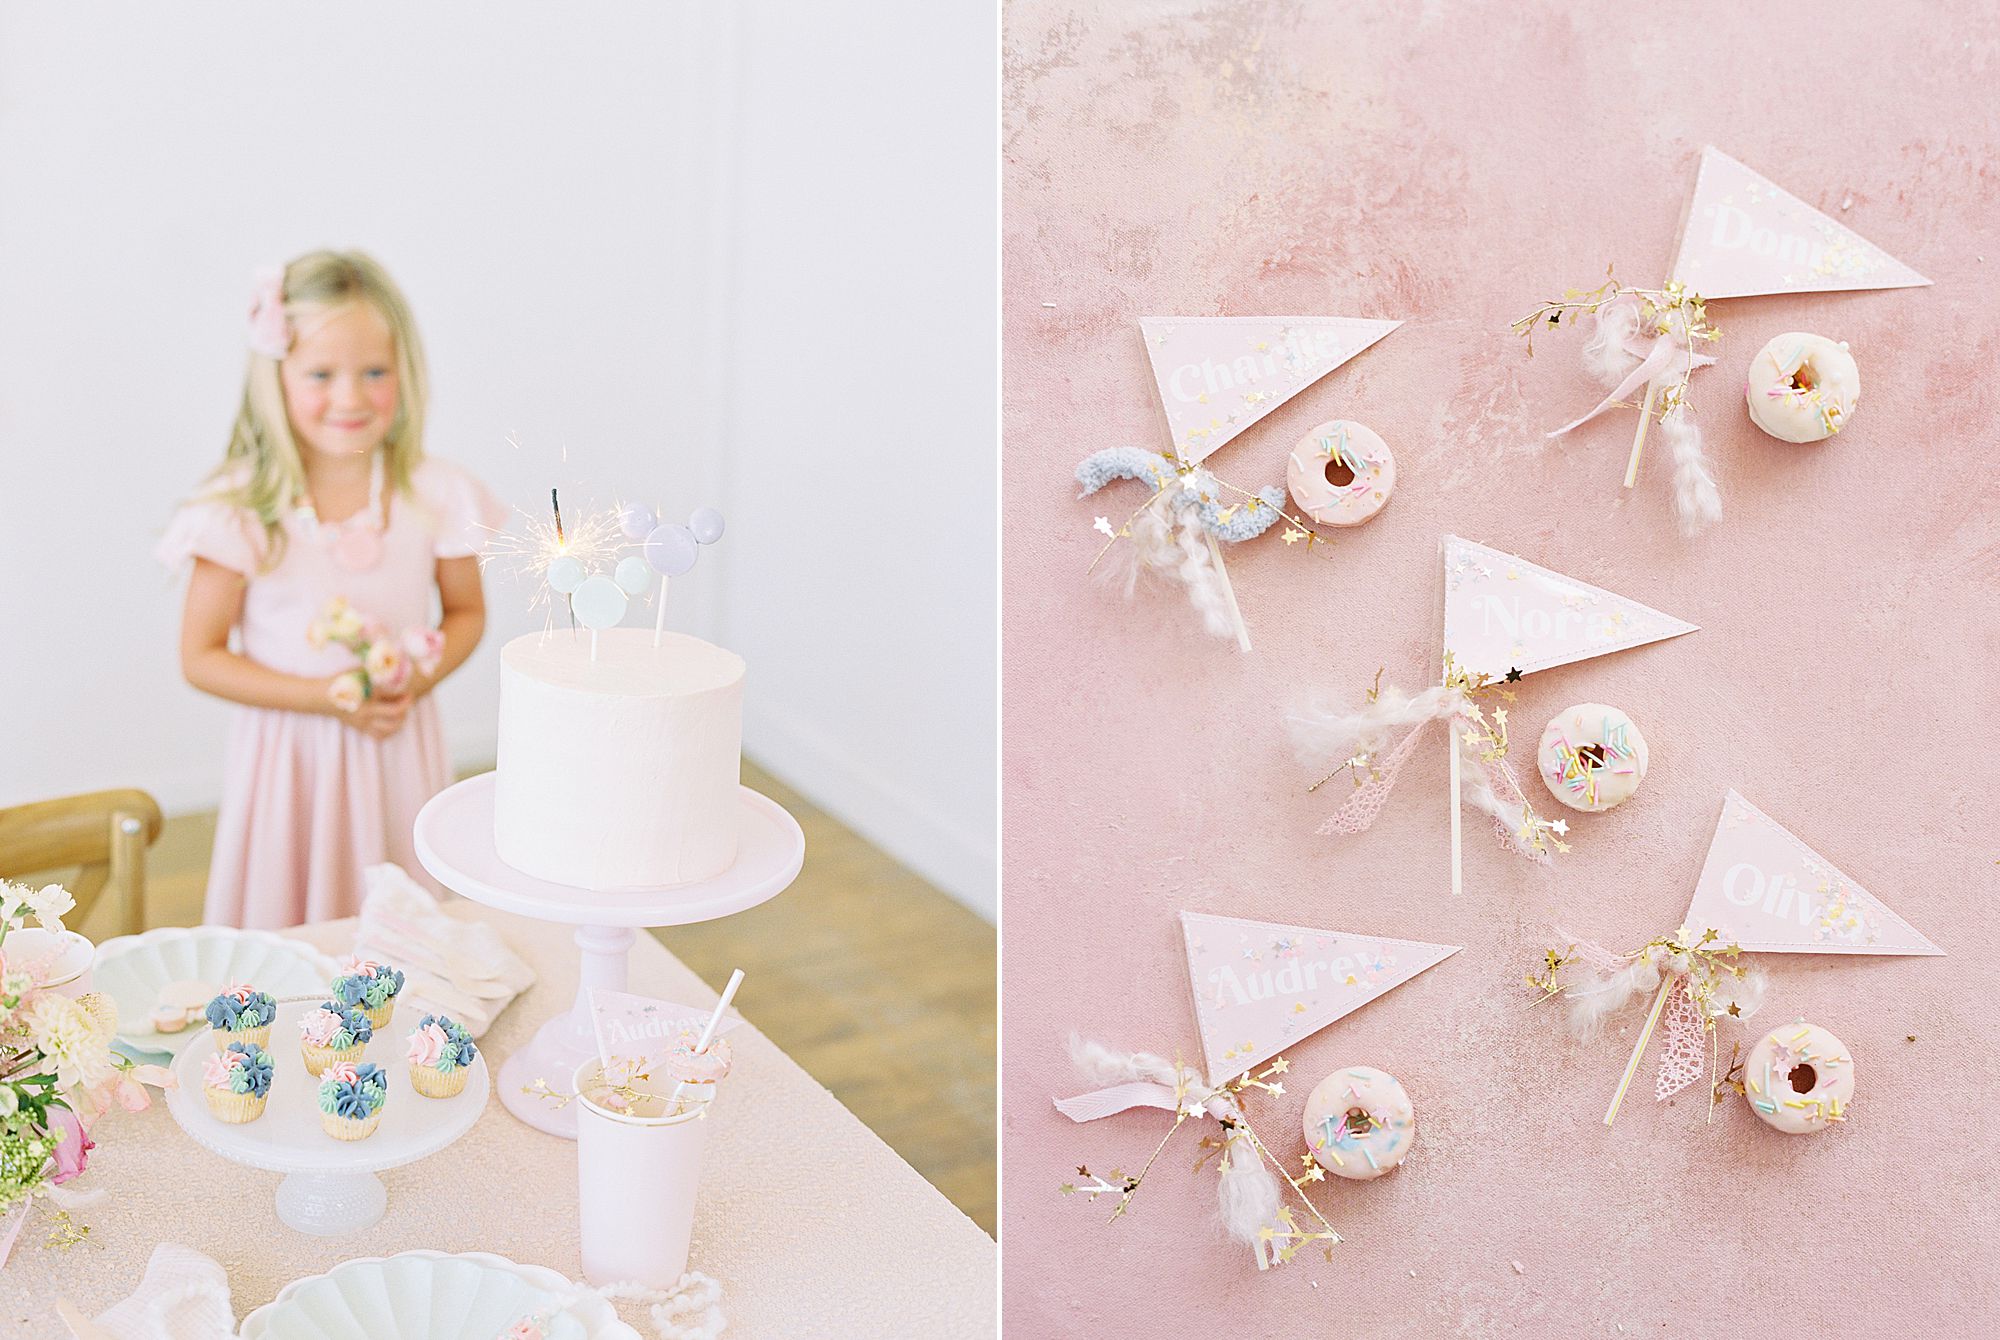 Vintage Disney Birthday Party for Princess Nora's Fourth Birthday - Featured on 100 Layer Cake - Ashley Baumgartner - Parker Grace Events_0010.jpg